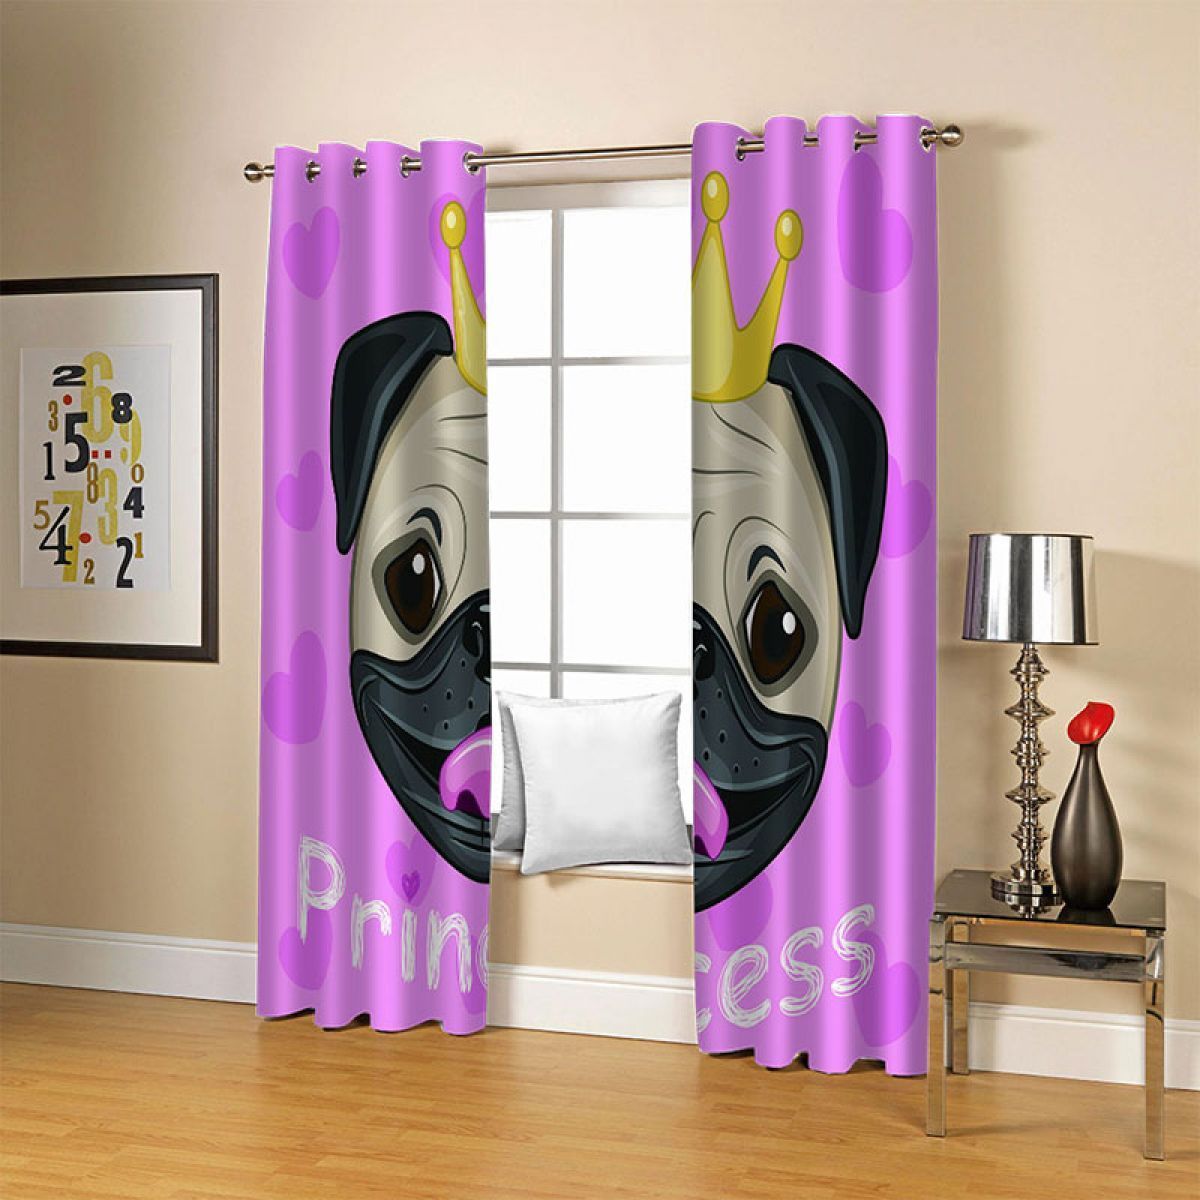 3d funny pug with crown printed window curtain home decor 6047